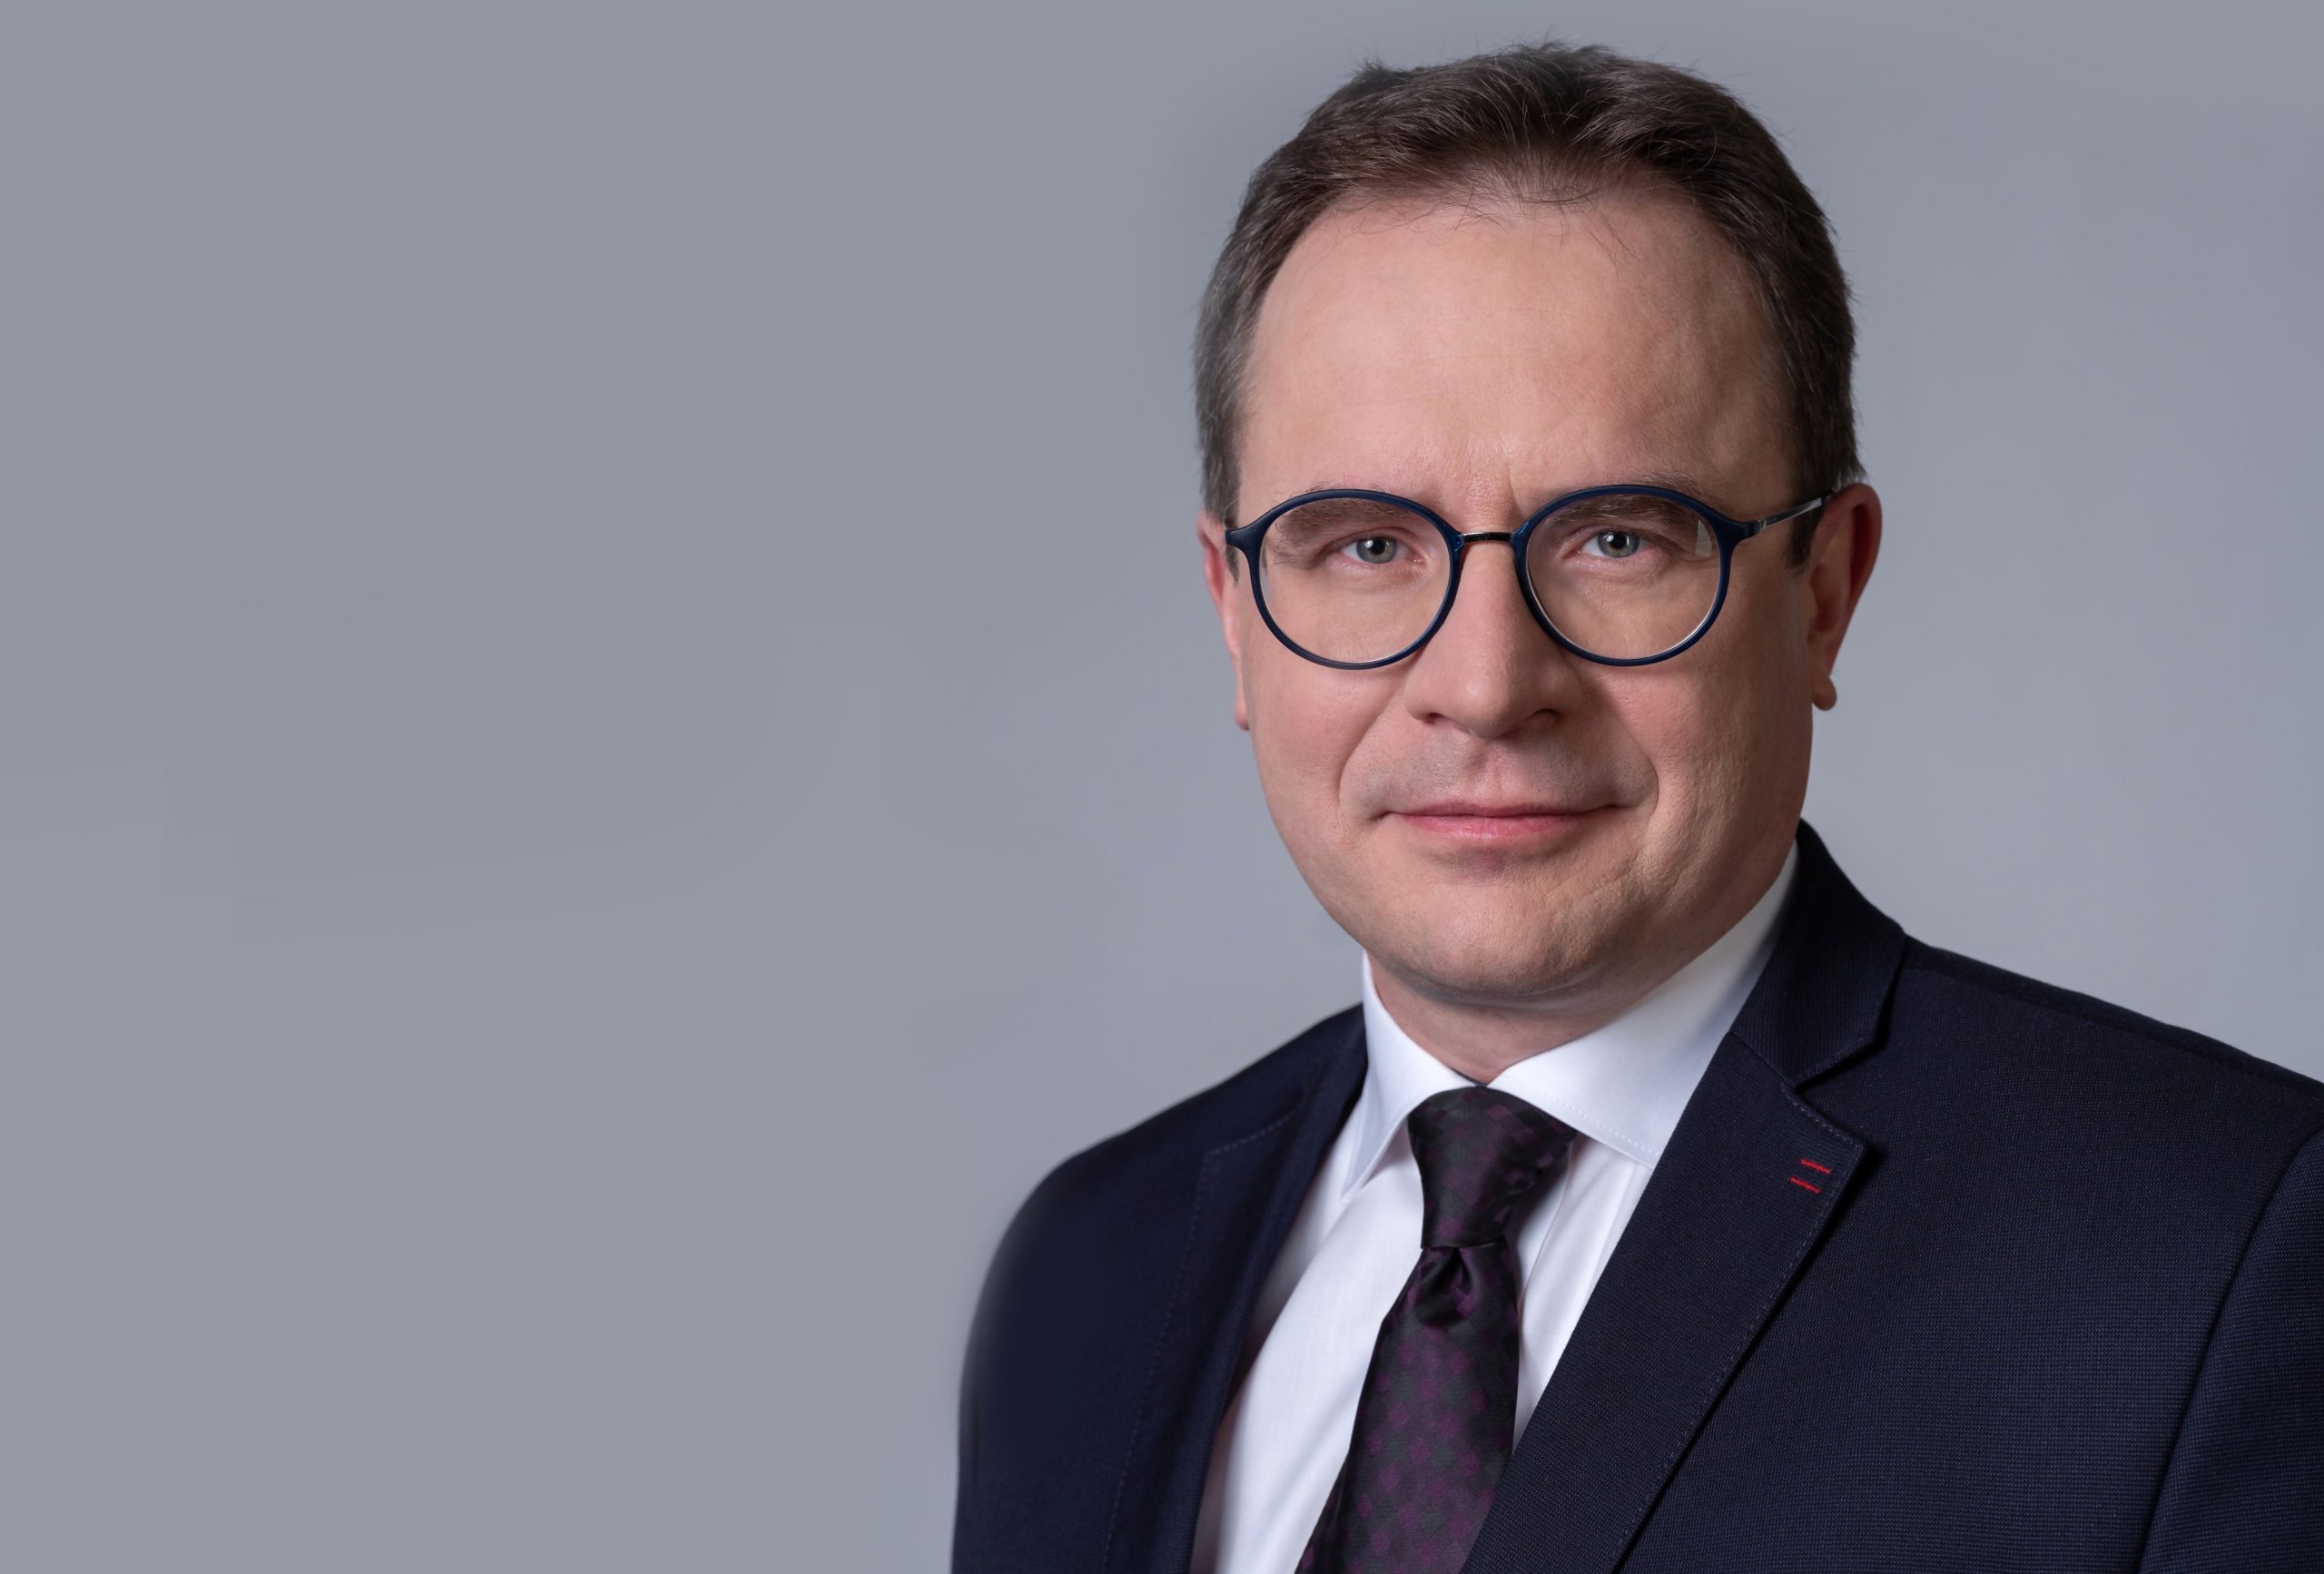 The role of the financial sector is to shape and promote good practice in sustainability reporting. Interview with Emil Ślązak, former Vice President of the Management Board in charge of the organisation’s management operations